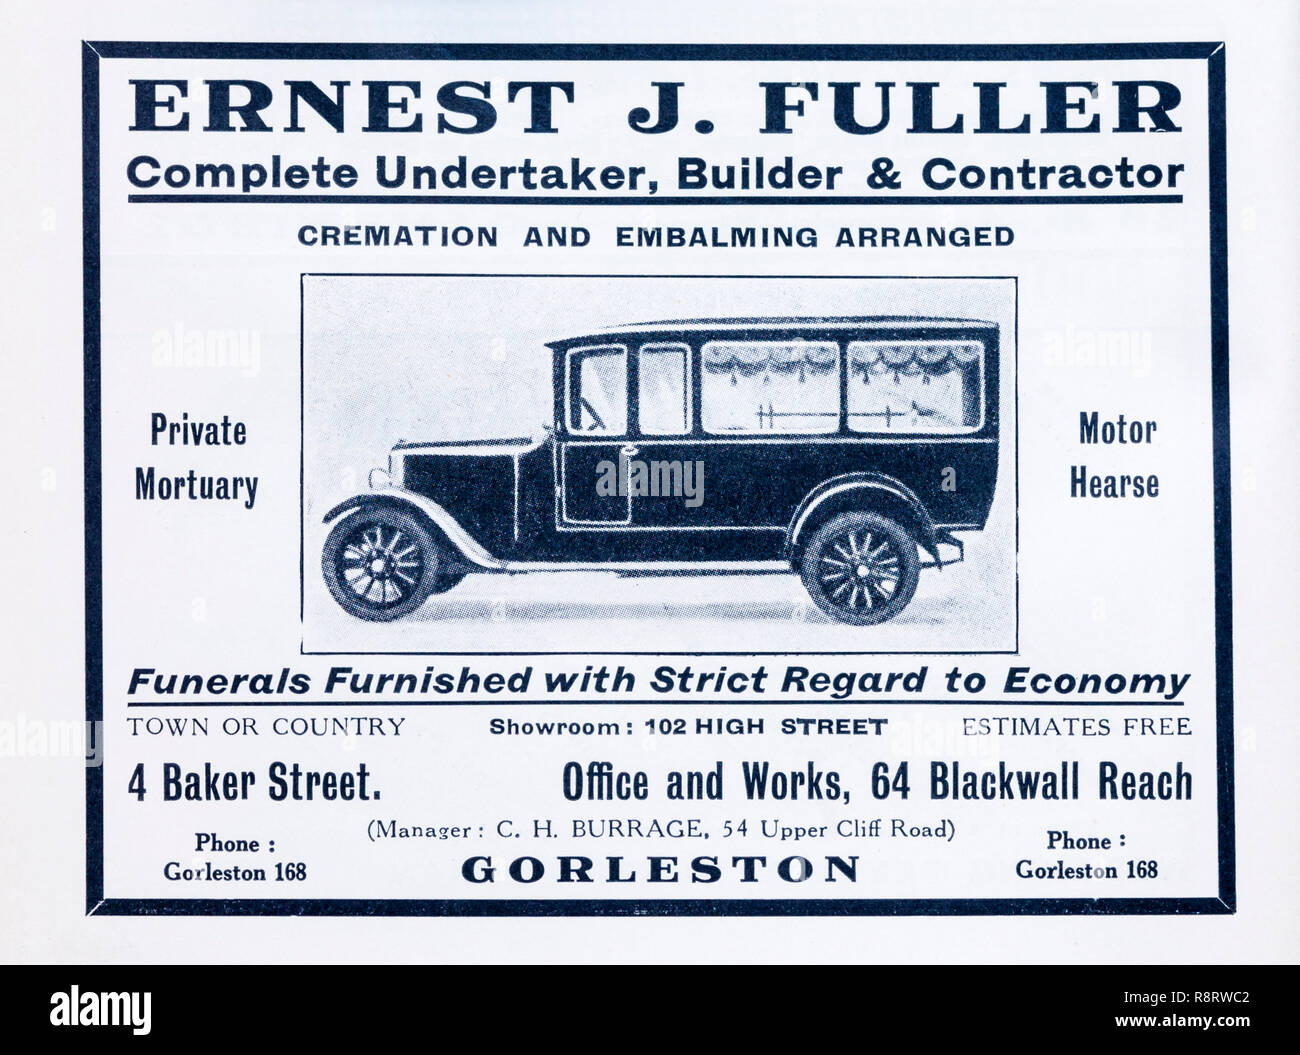 A 1930s advertisement for an Undertakers or Funeral Directors, Ernest J. Fuller of Gorleston Stock Photo